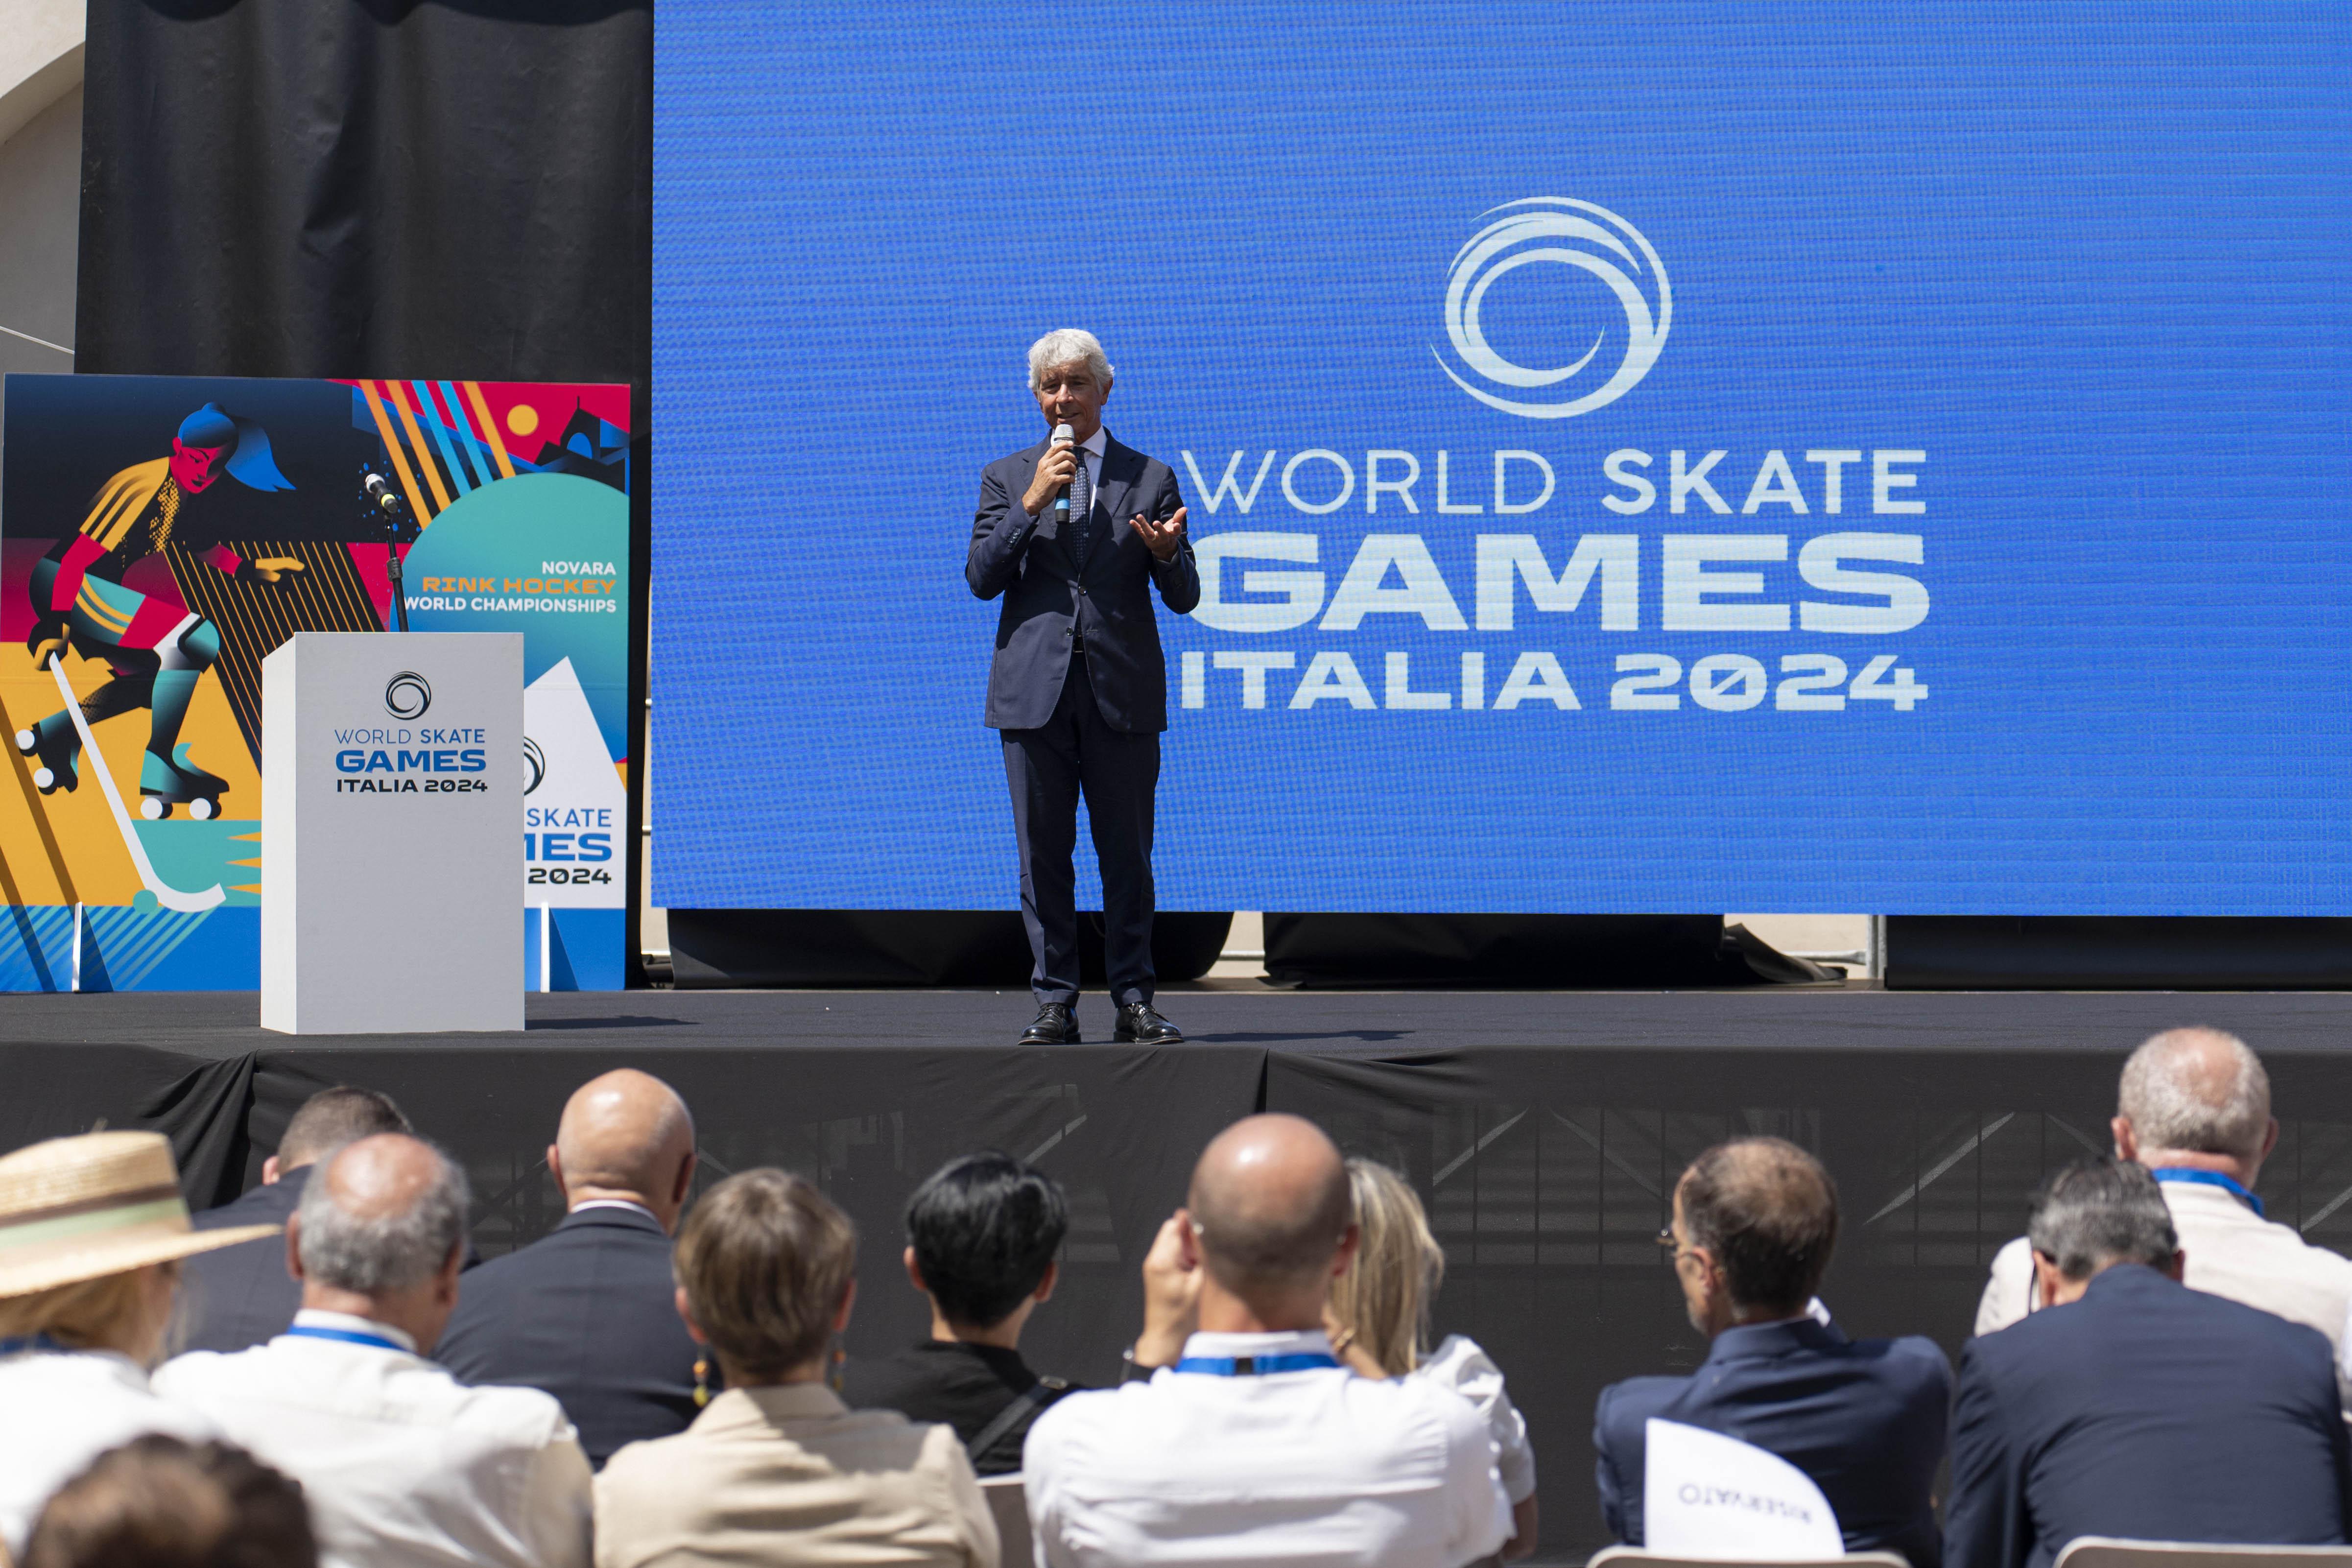 World Skate Games land in Italy and Piedmont for the first time in history